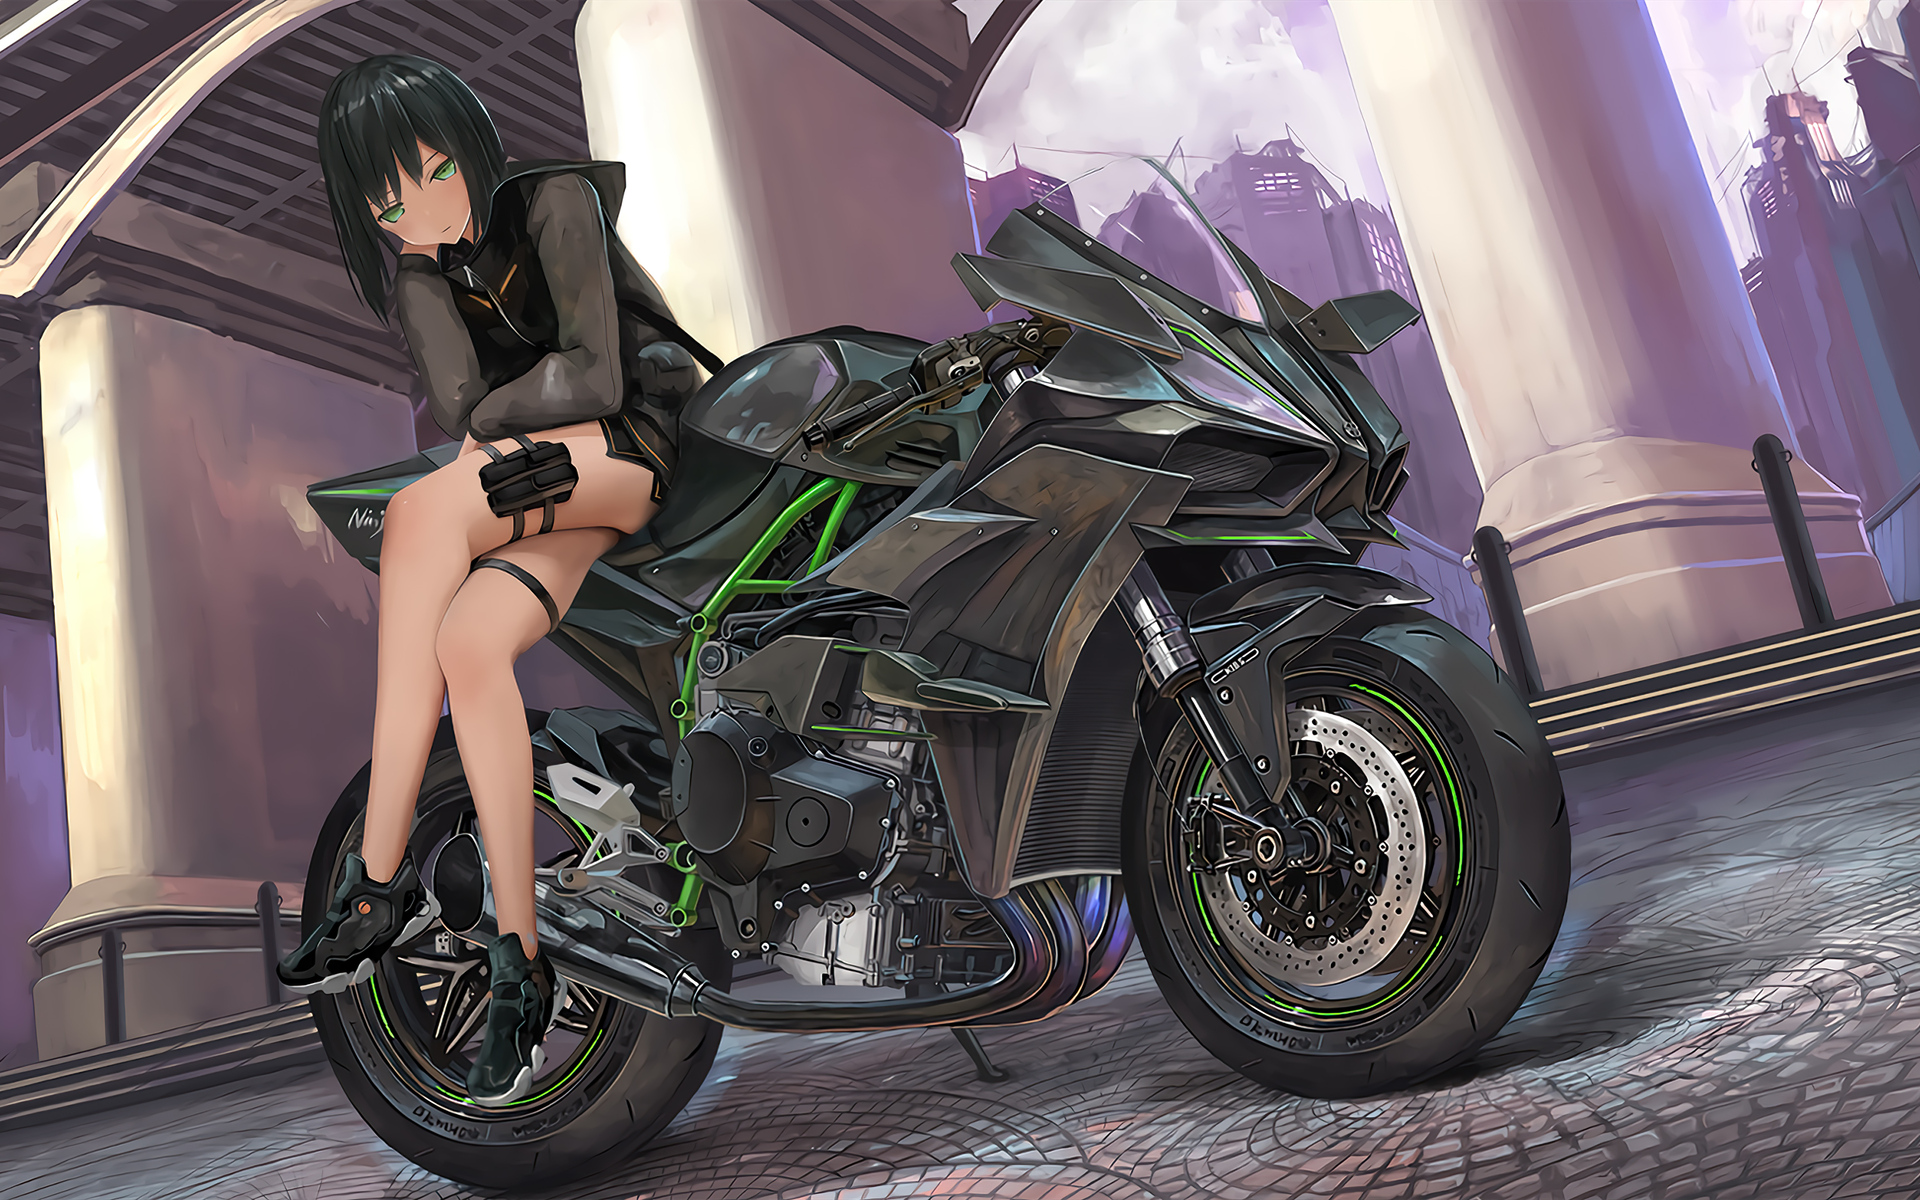 X anime girl kawasaki hr k p resolution hd k wallpapers images backgrounds photos and pictures